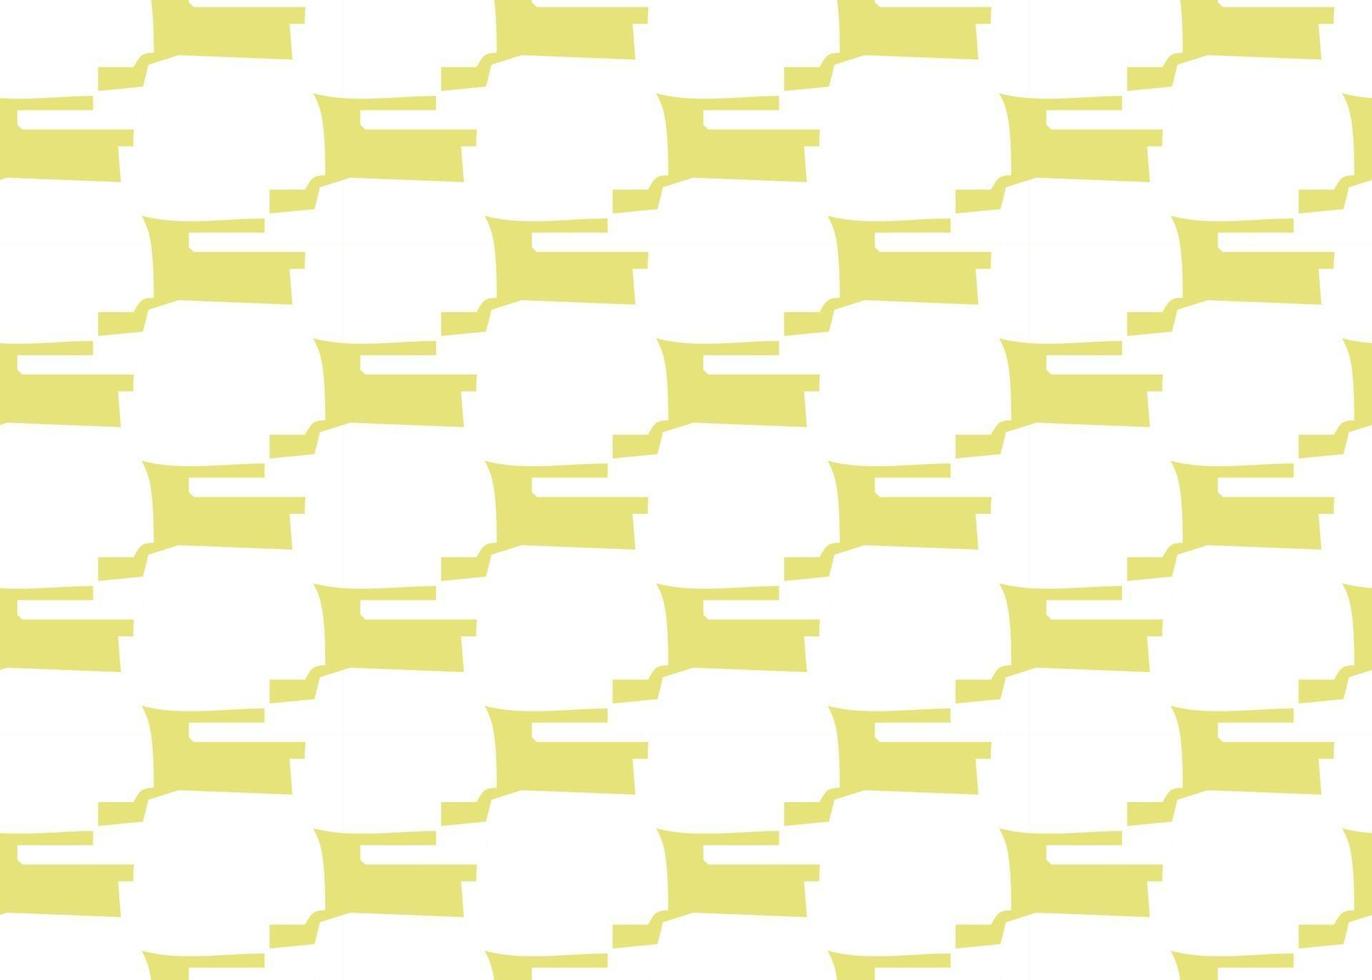 Vector texture background, seamless pattern. Hand drawn, yellow, white colors.